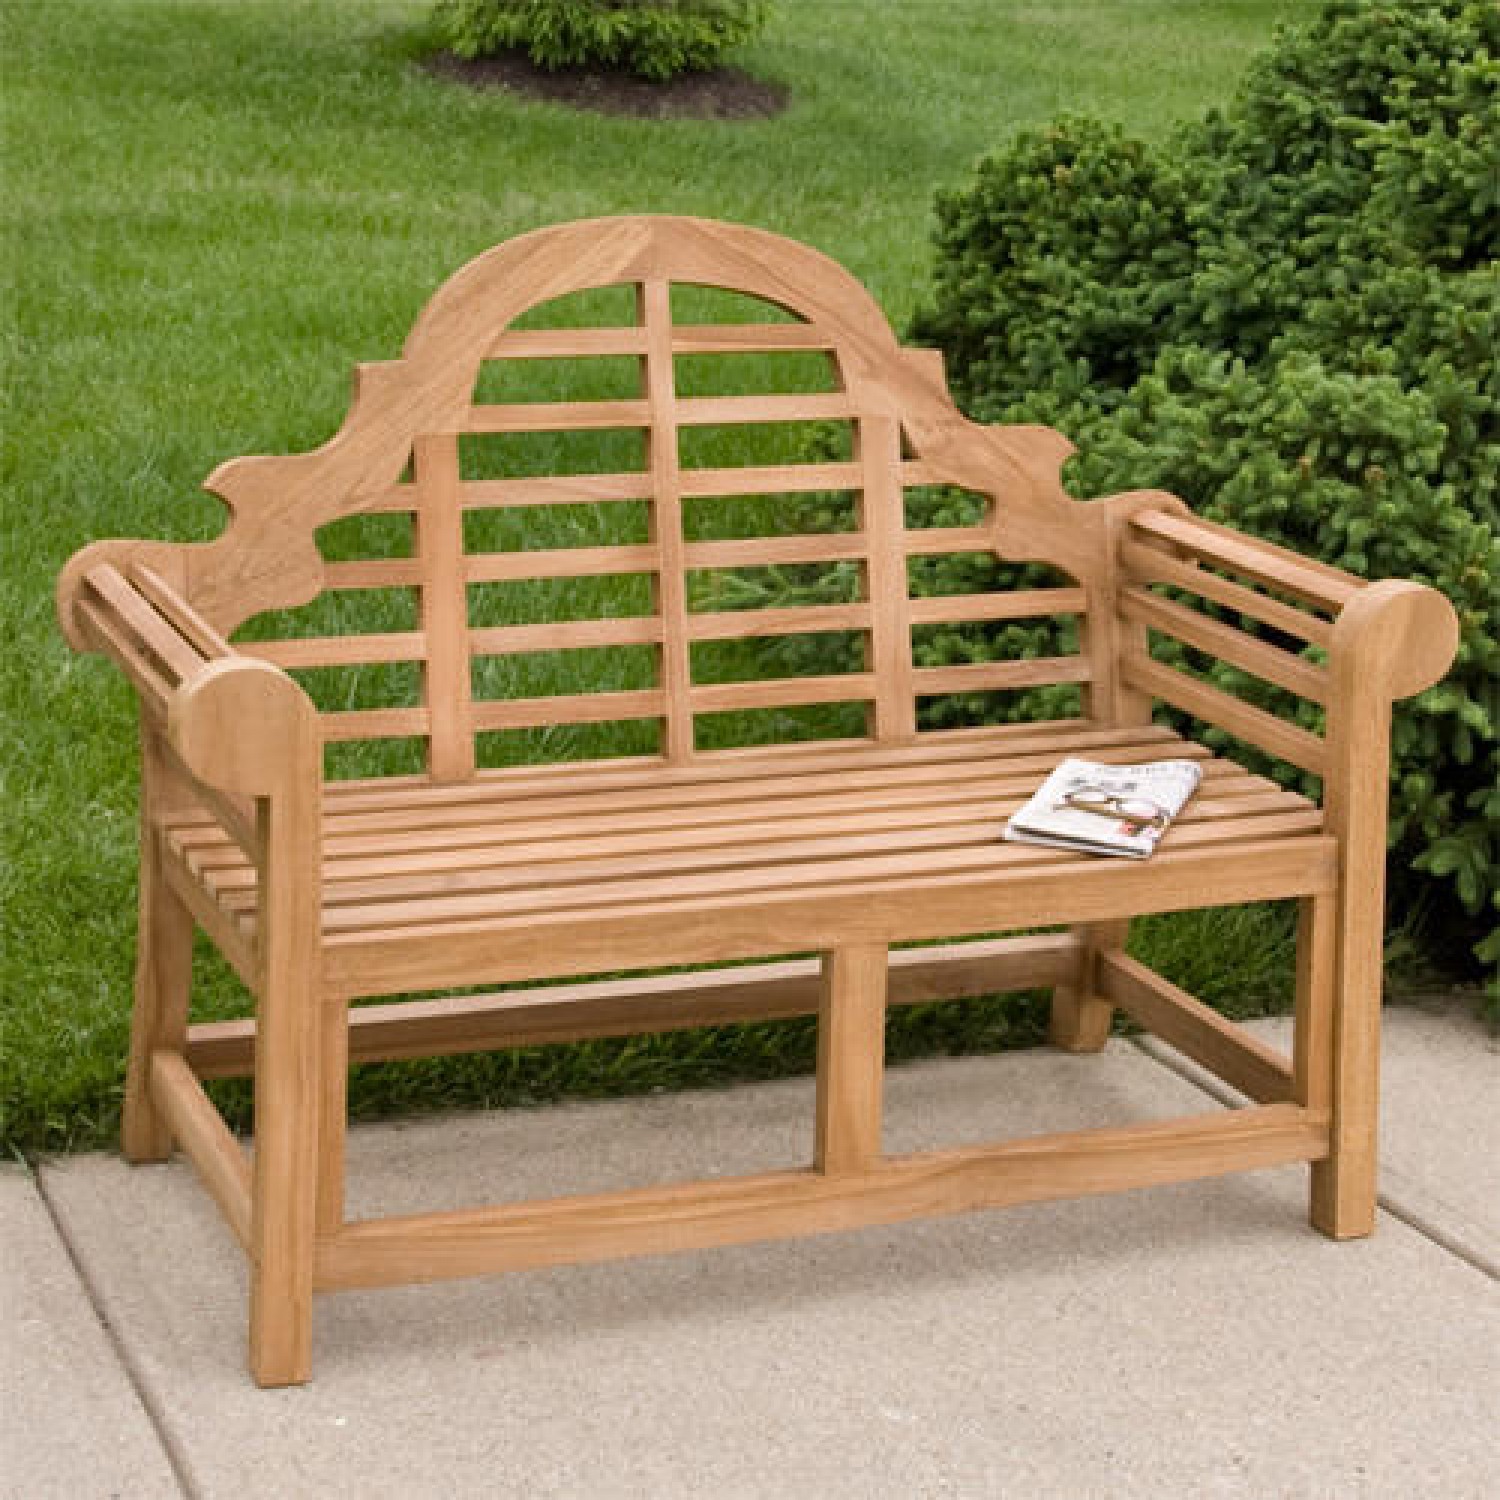 Outdoor Benches- the perfect way to relax in the outdoors